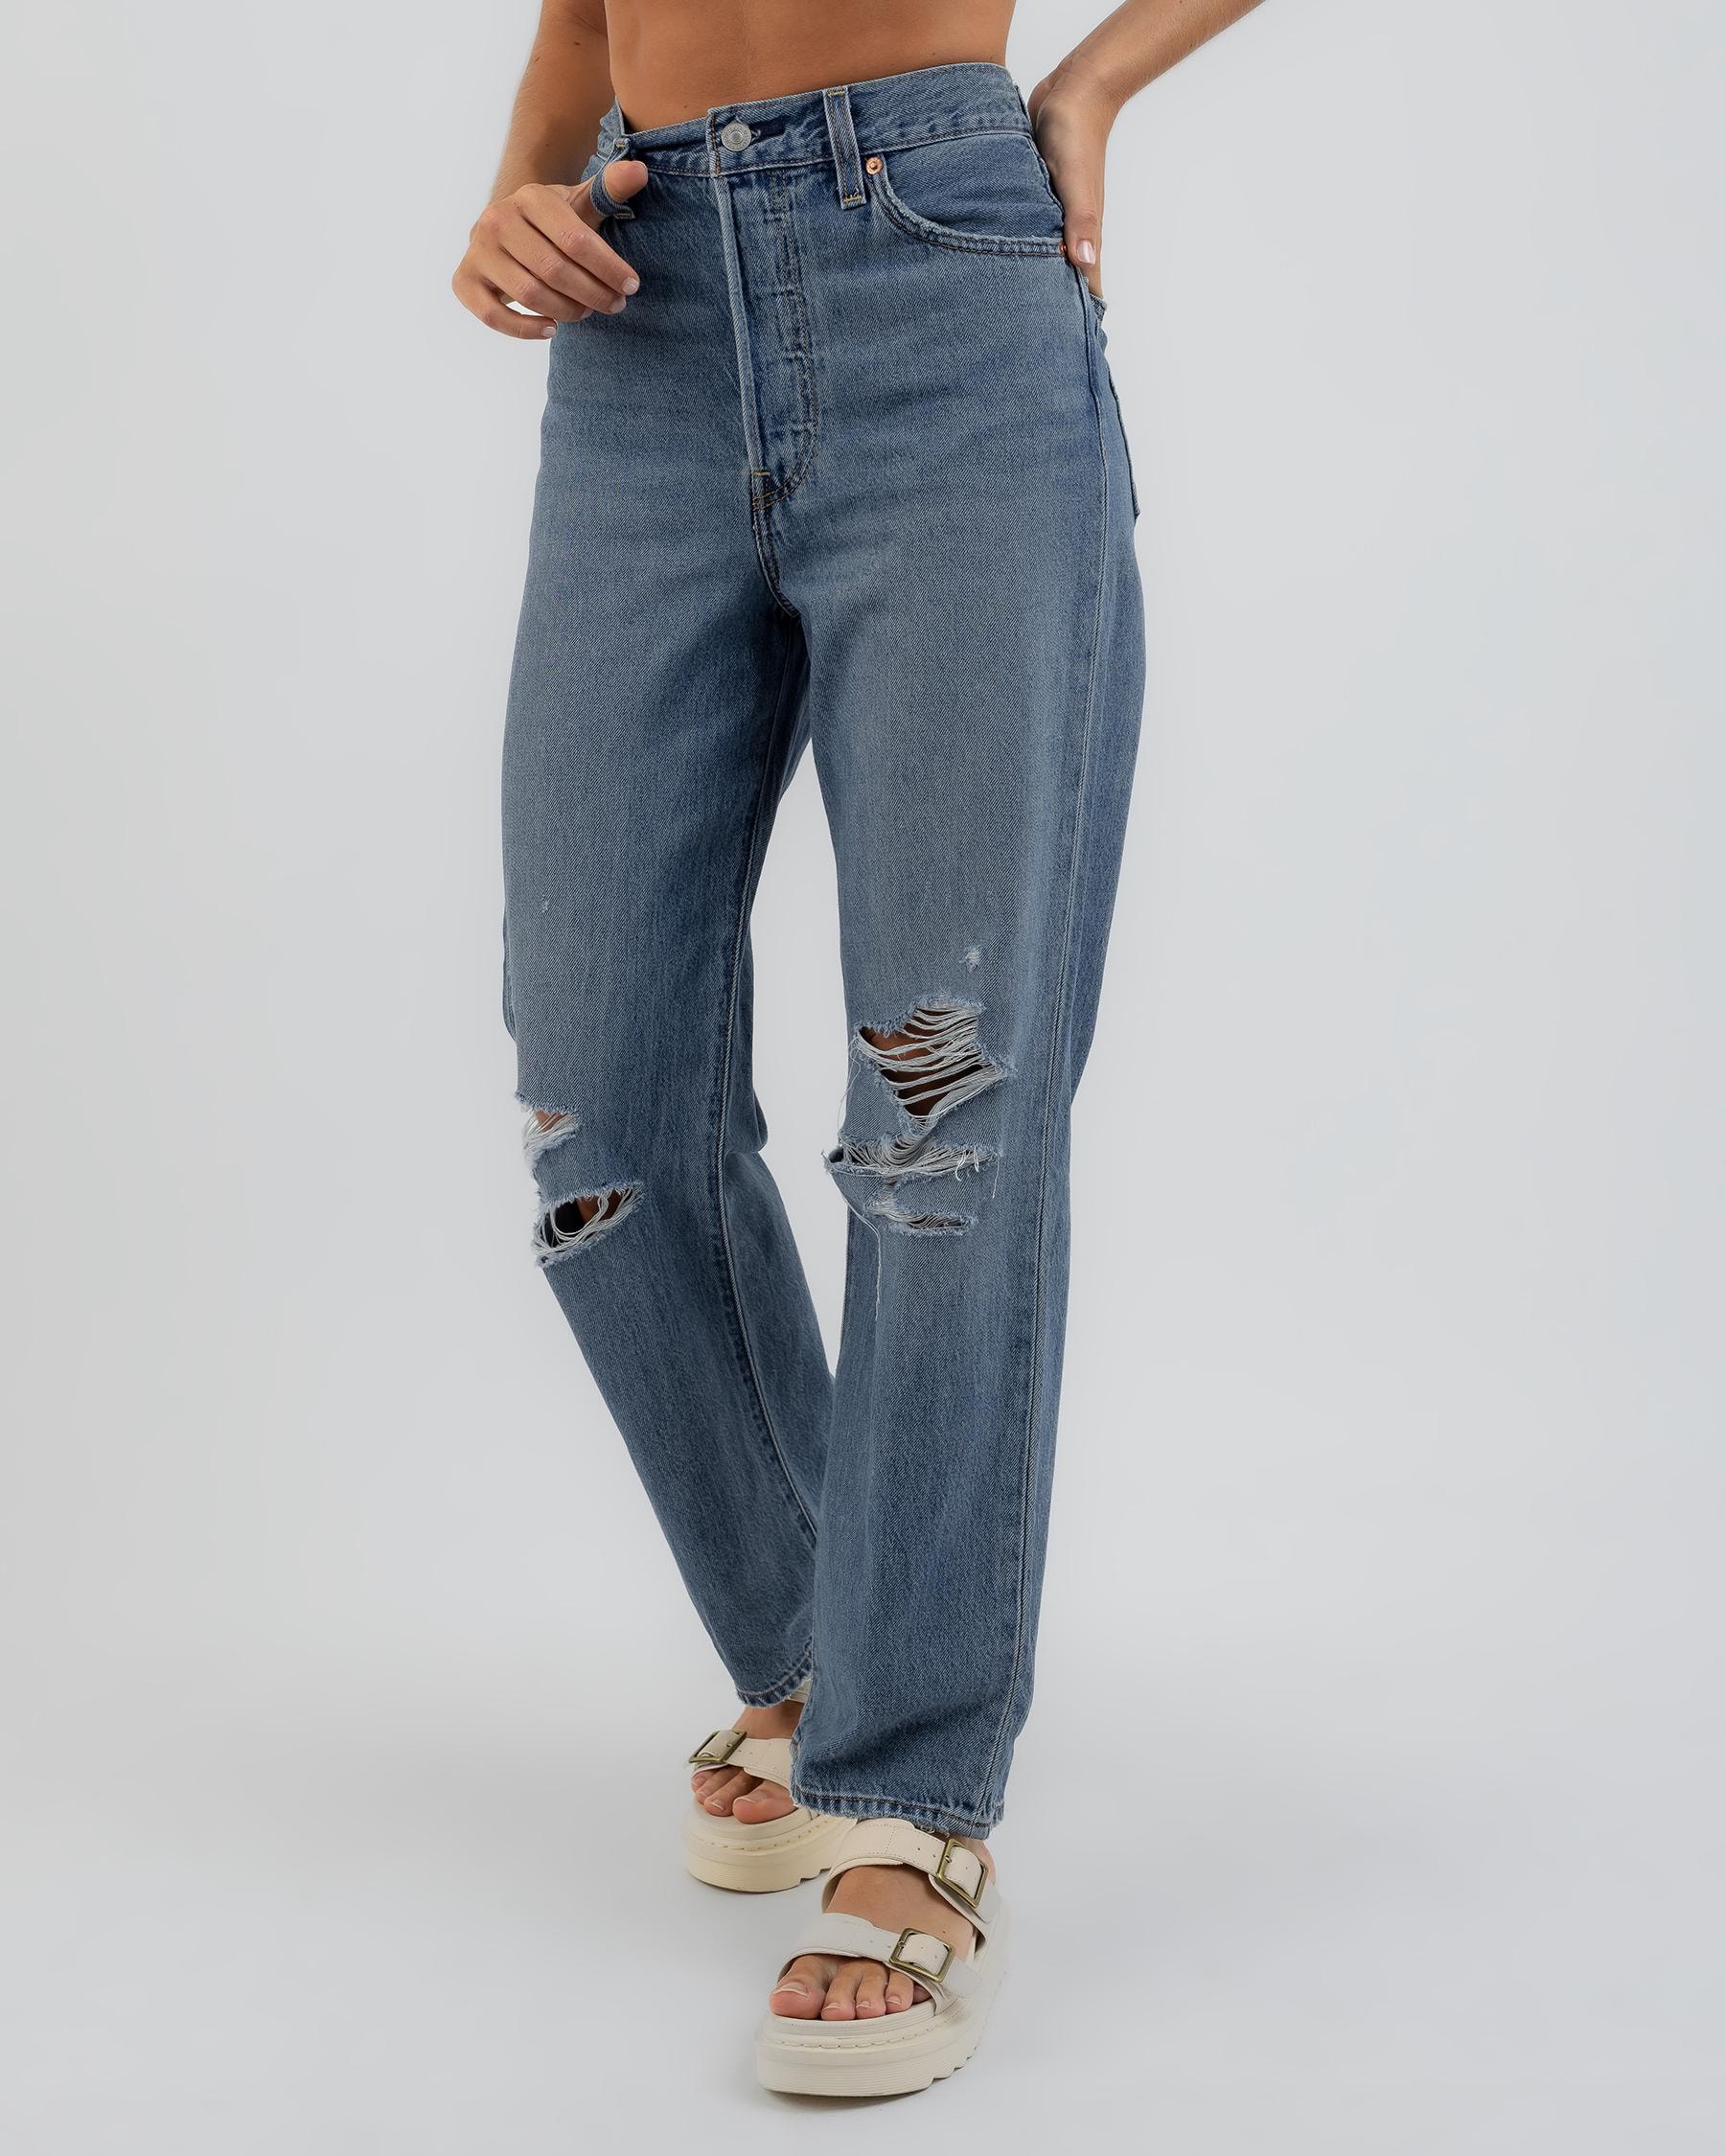 Levi's Ribcage Jeans In After Love - Fast Shipping & Easy Returns ...